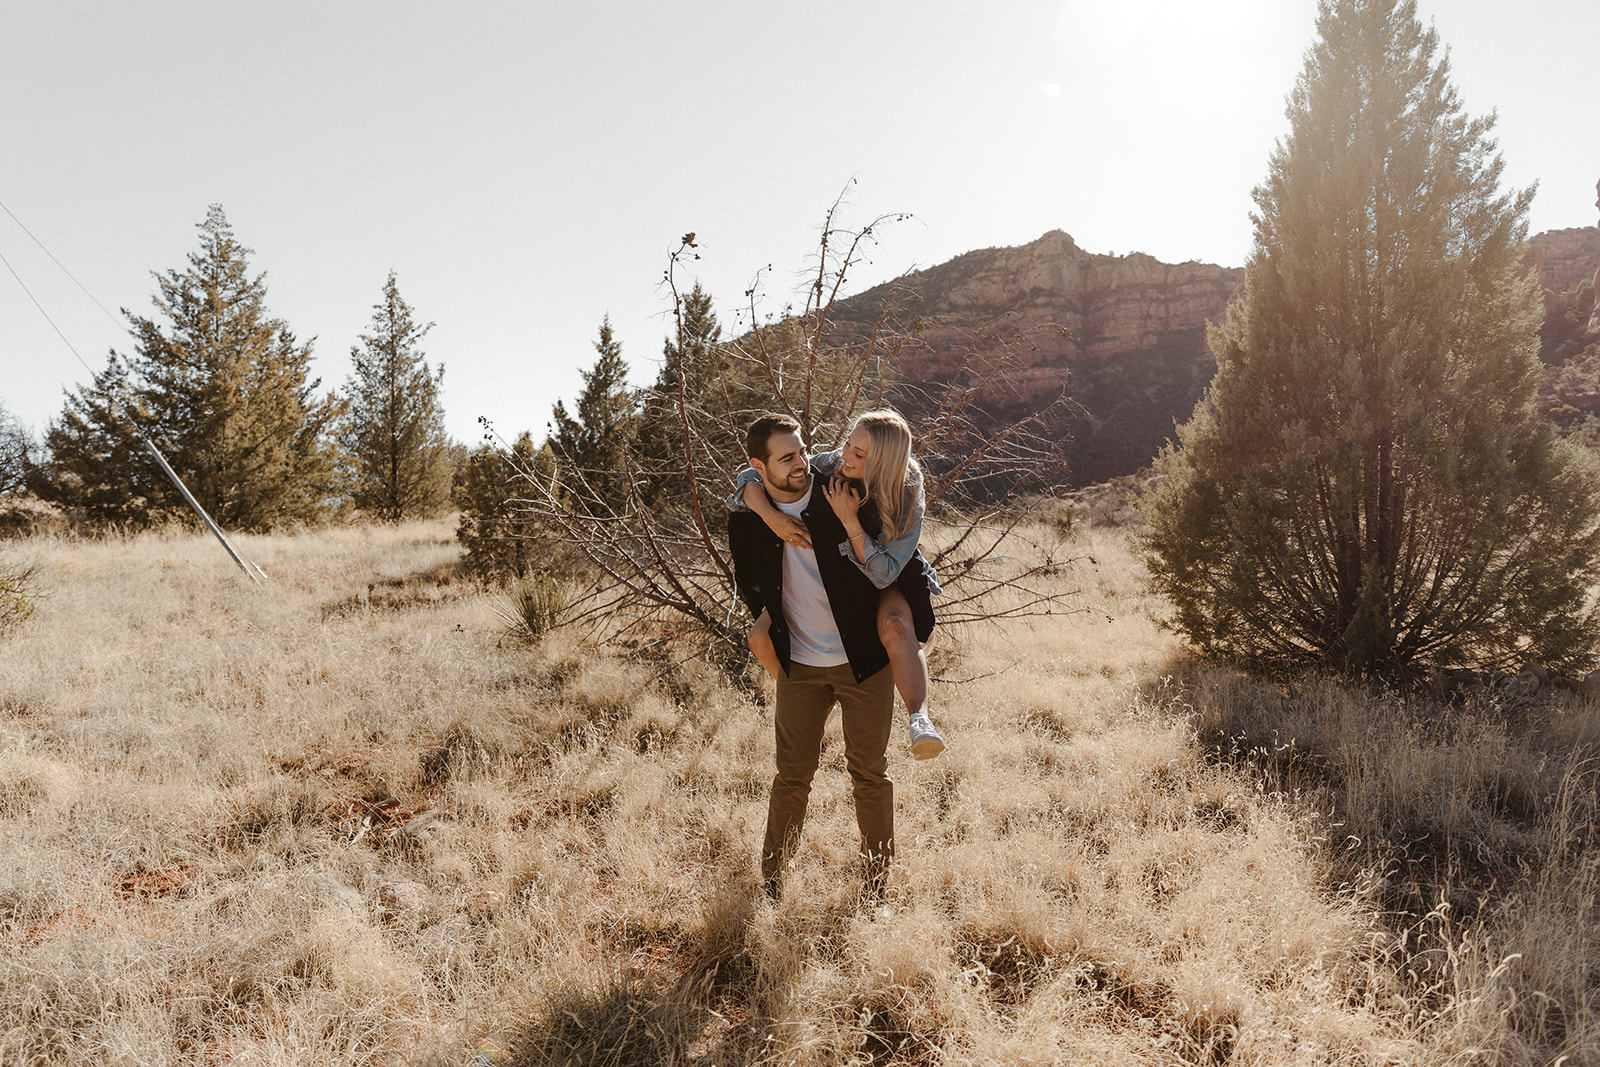 finace on other fiances back in the grass during sedona engagement photos